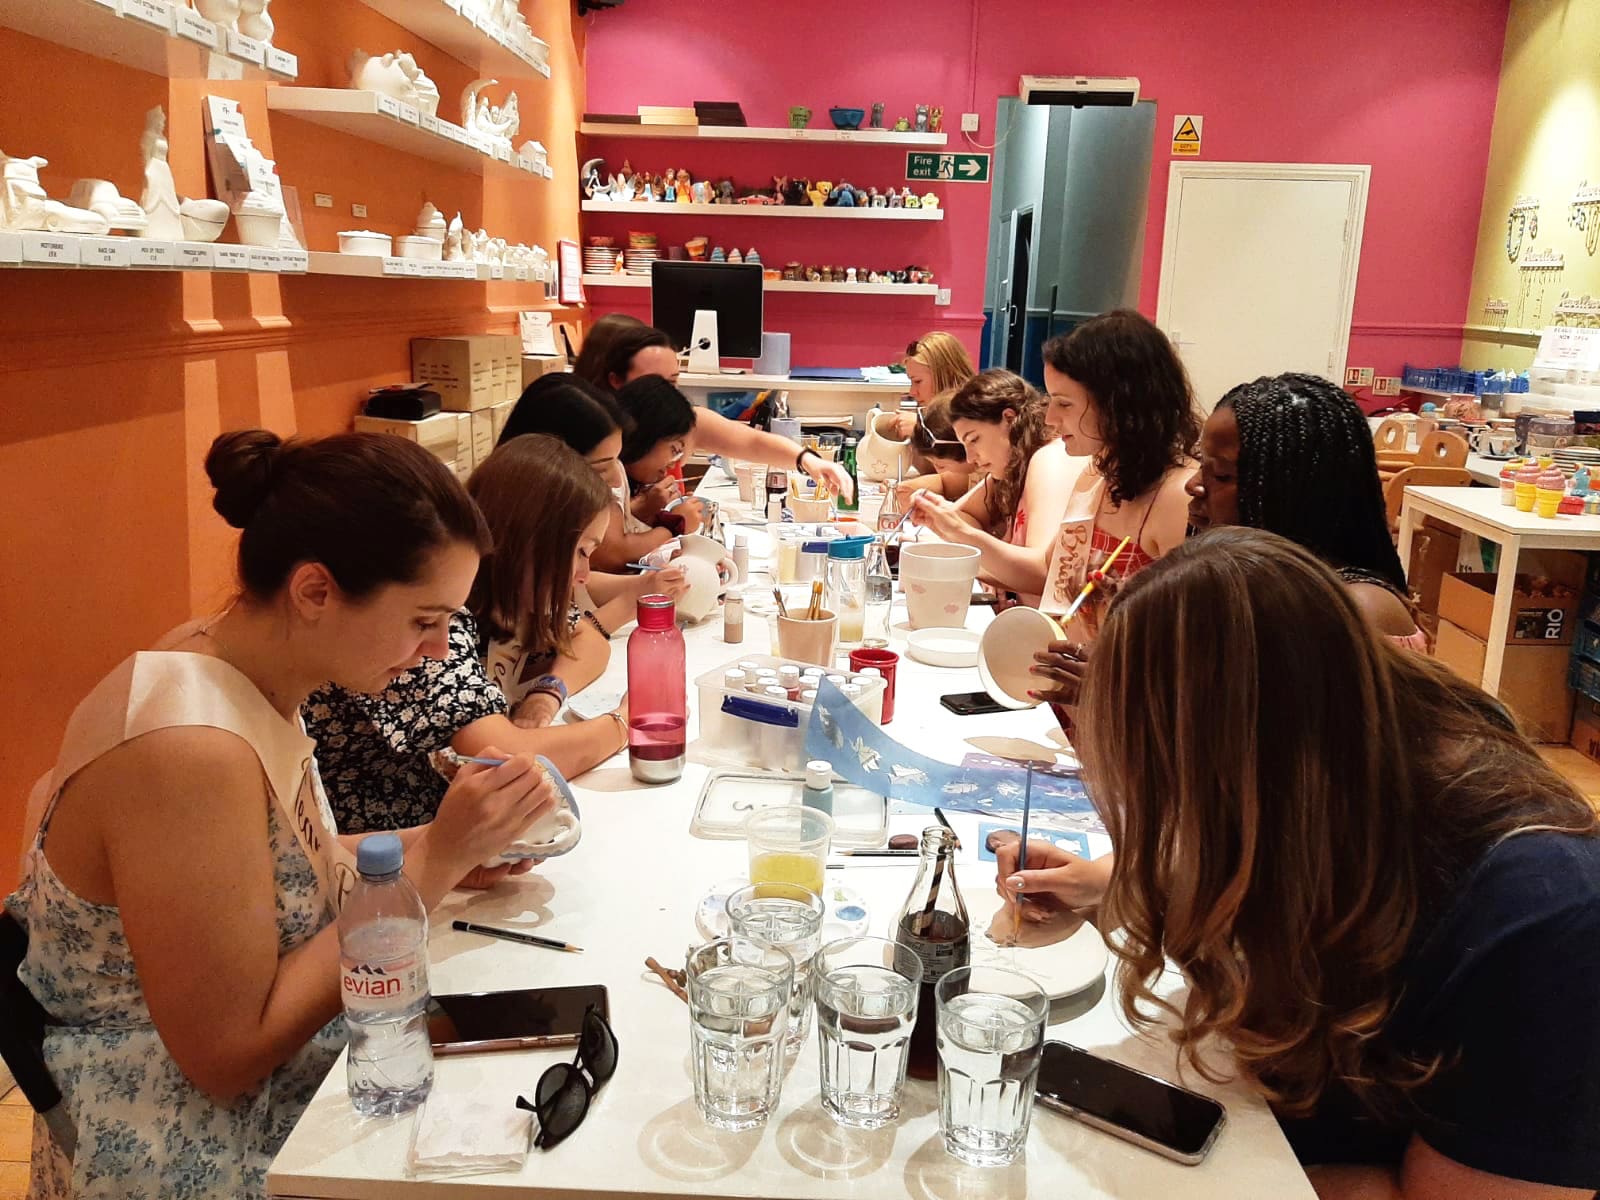 A group of women sat around painting ceramics inside Cafe Craft